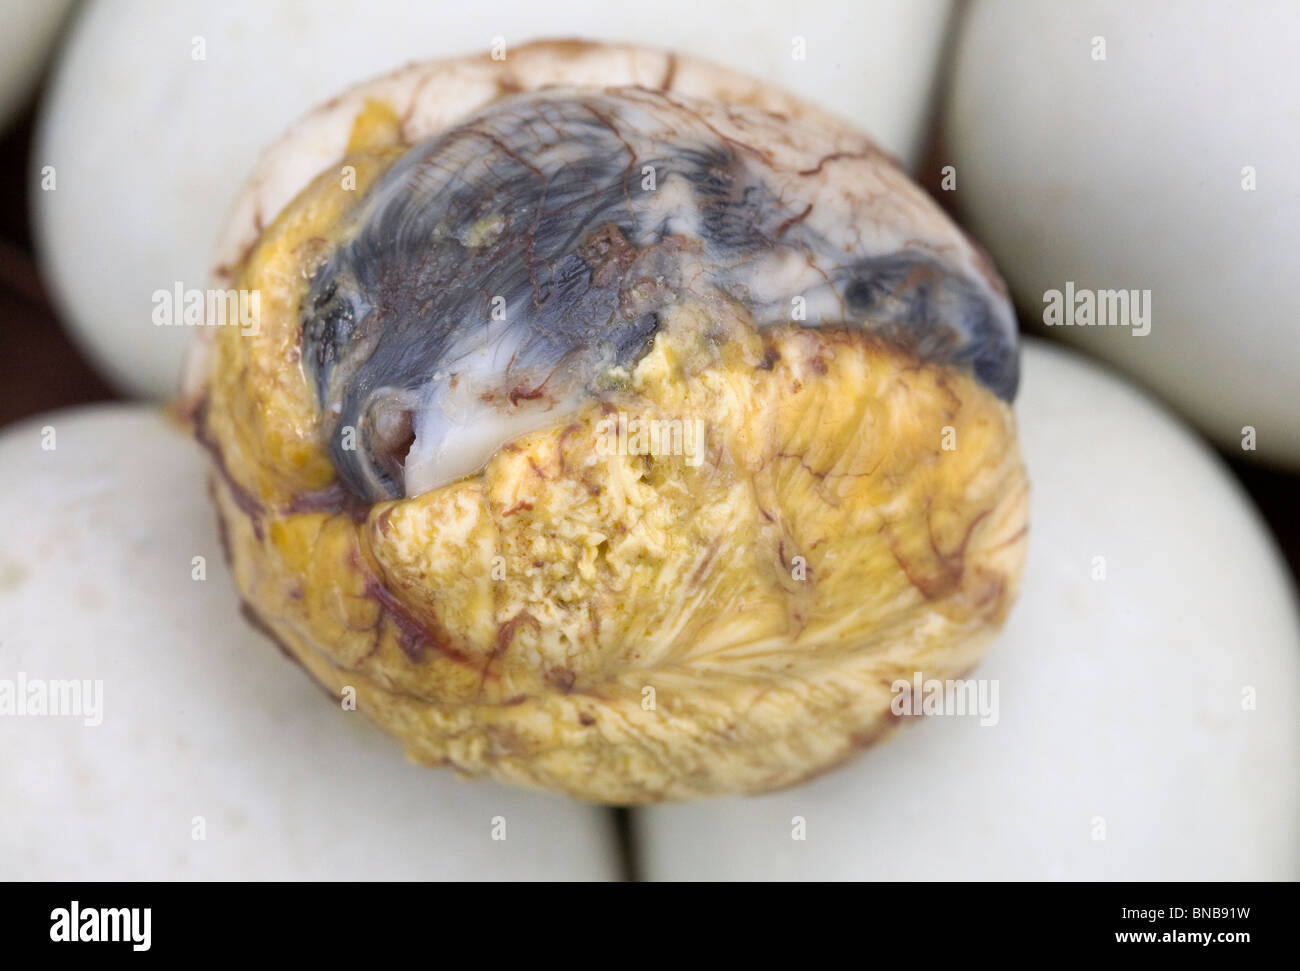 A balut, or cooked fertilized duck egg, removed from its shell is pictured among other whole balut eggs in the Philippines. Stock Photo